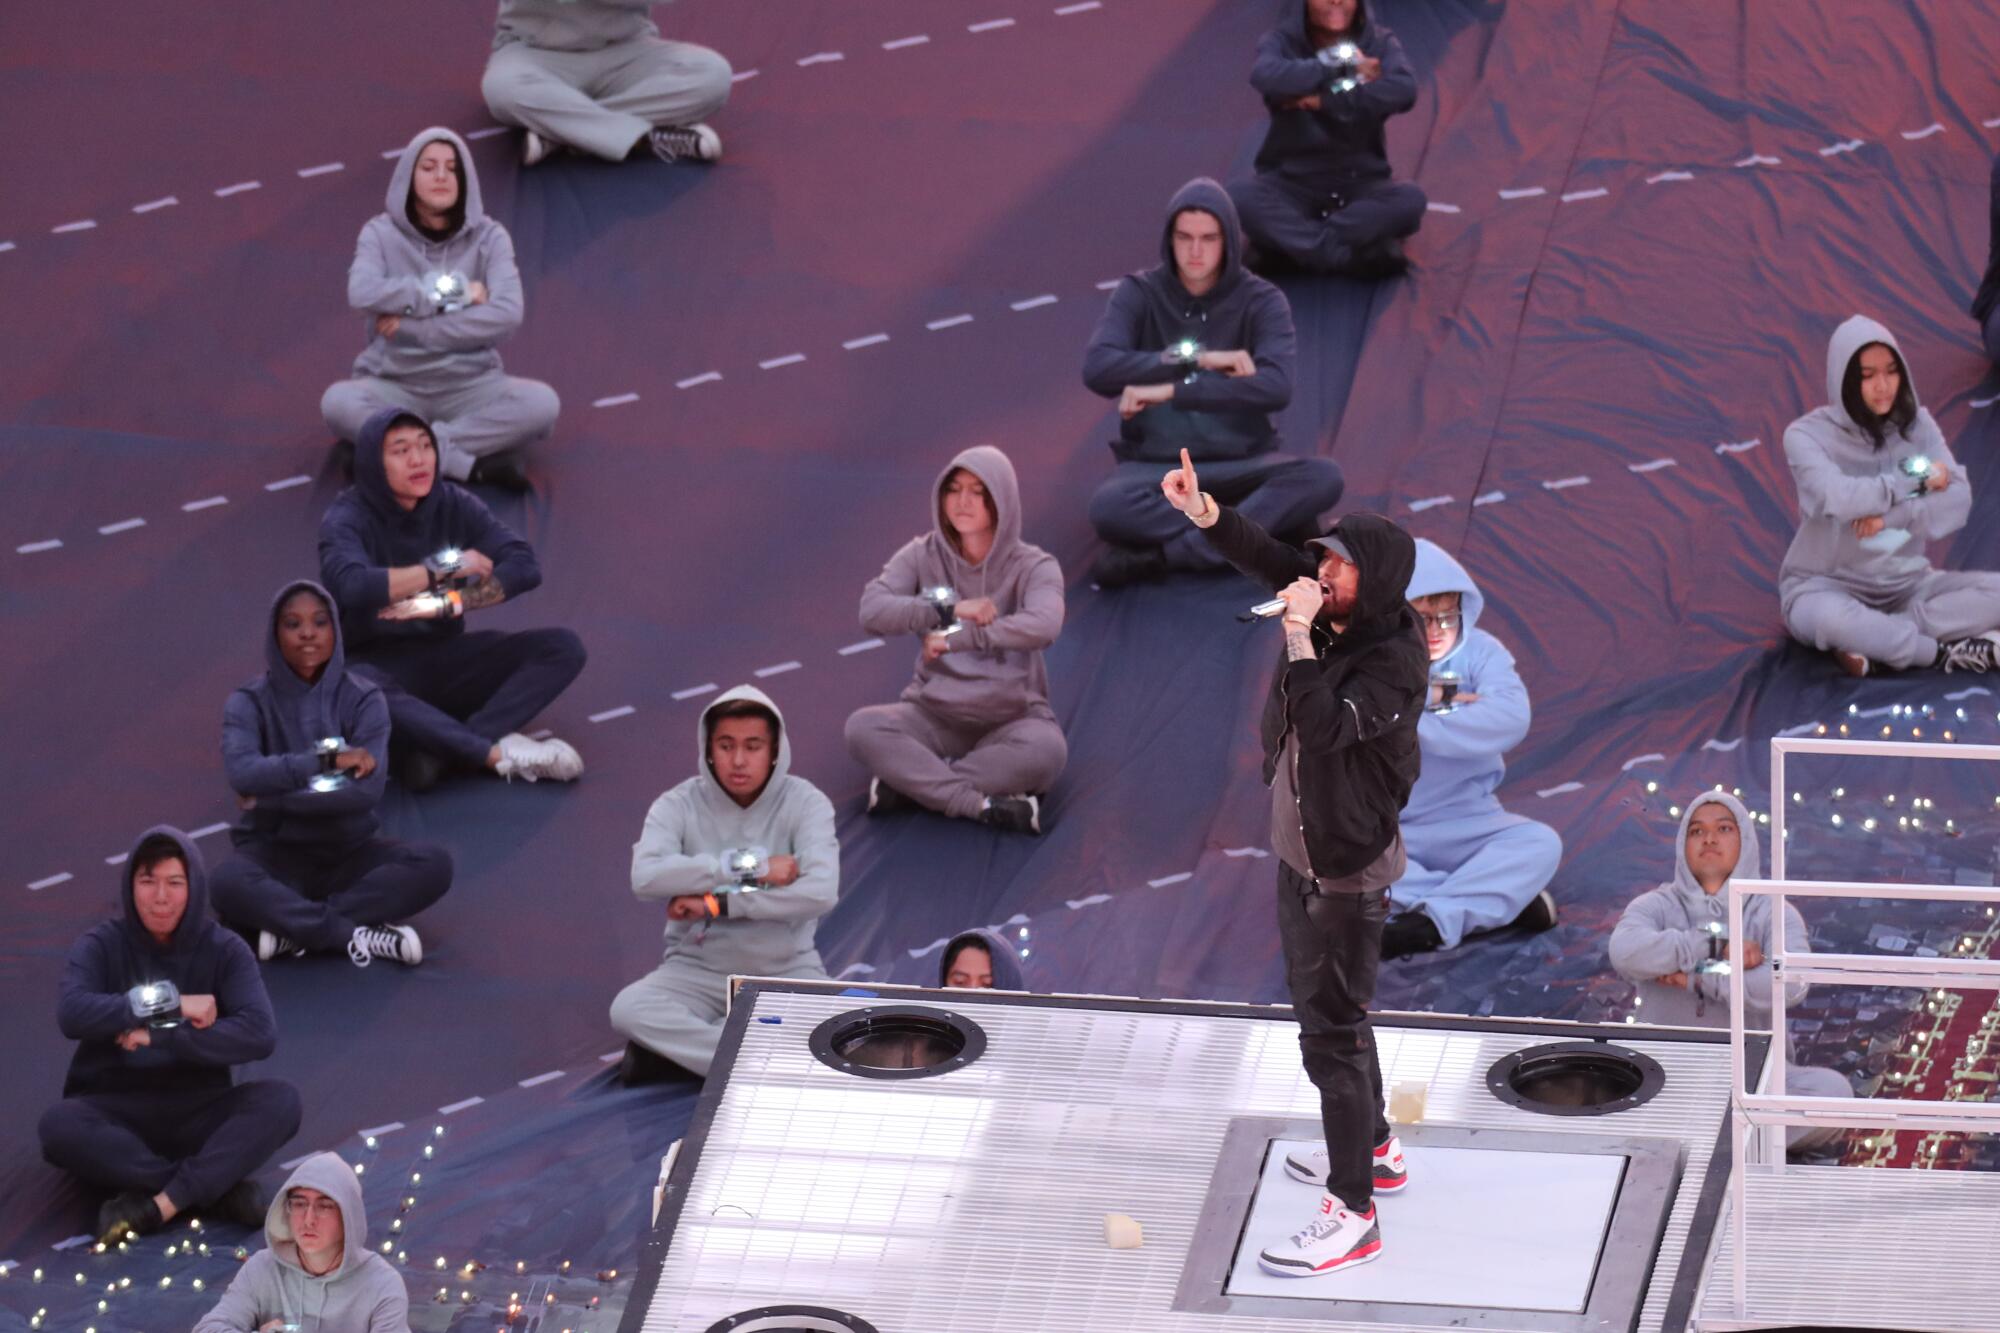 A man in a hoodie onstage, with seated people in hoodies around him. 